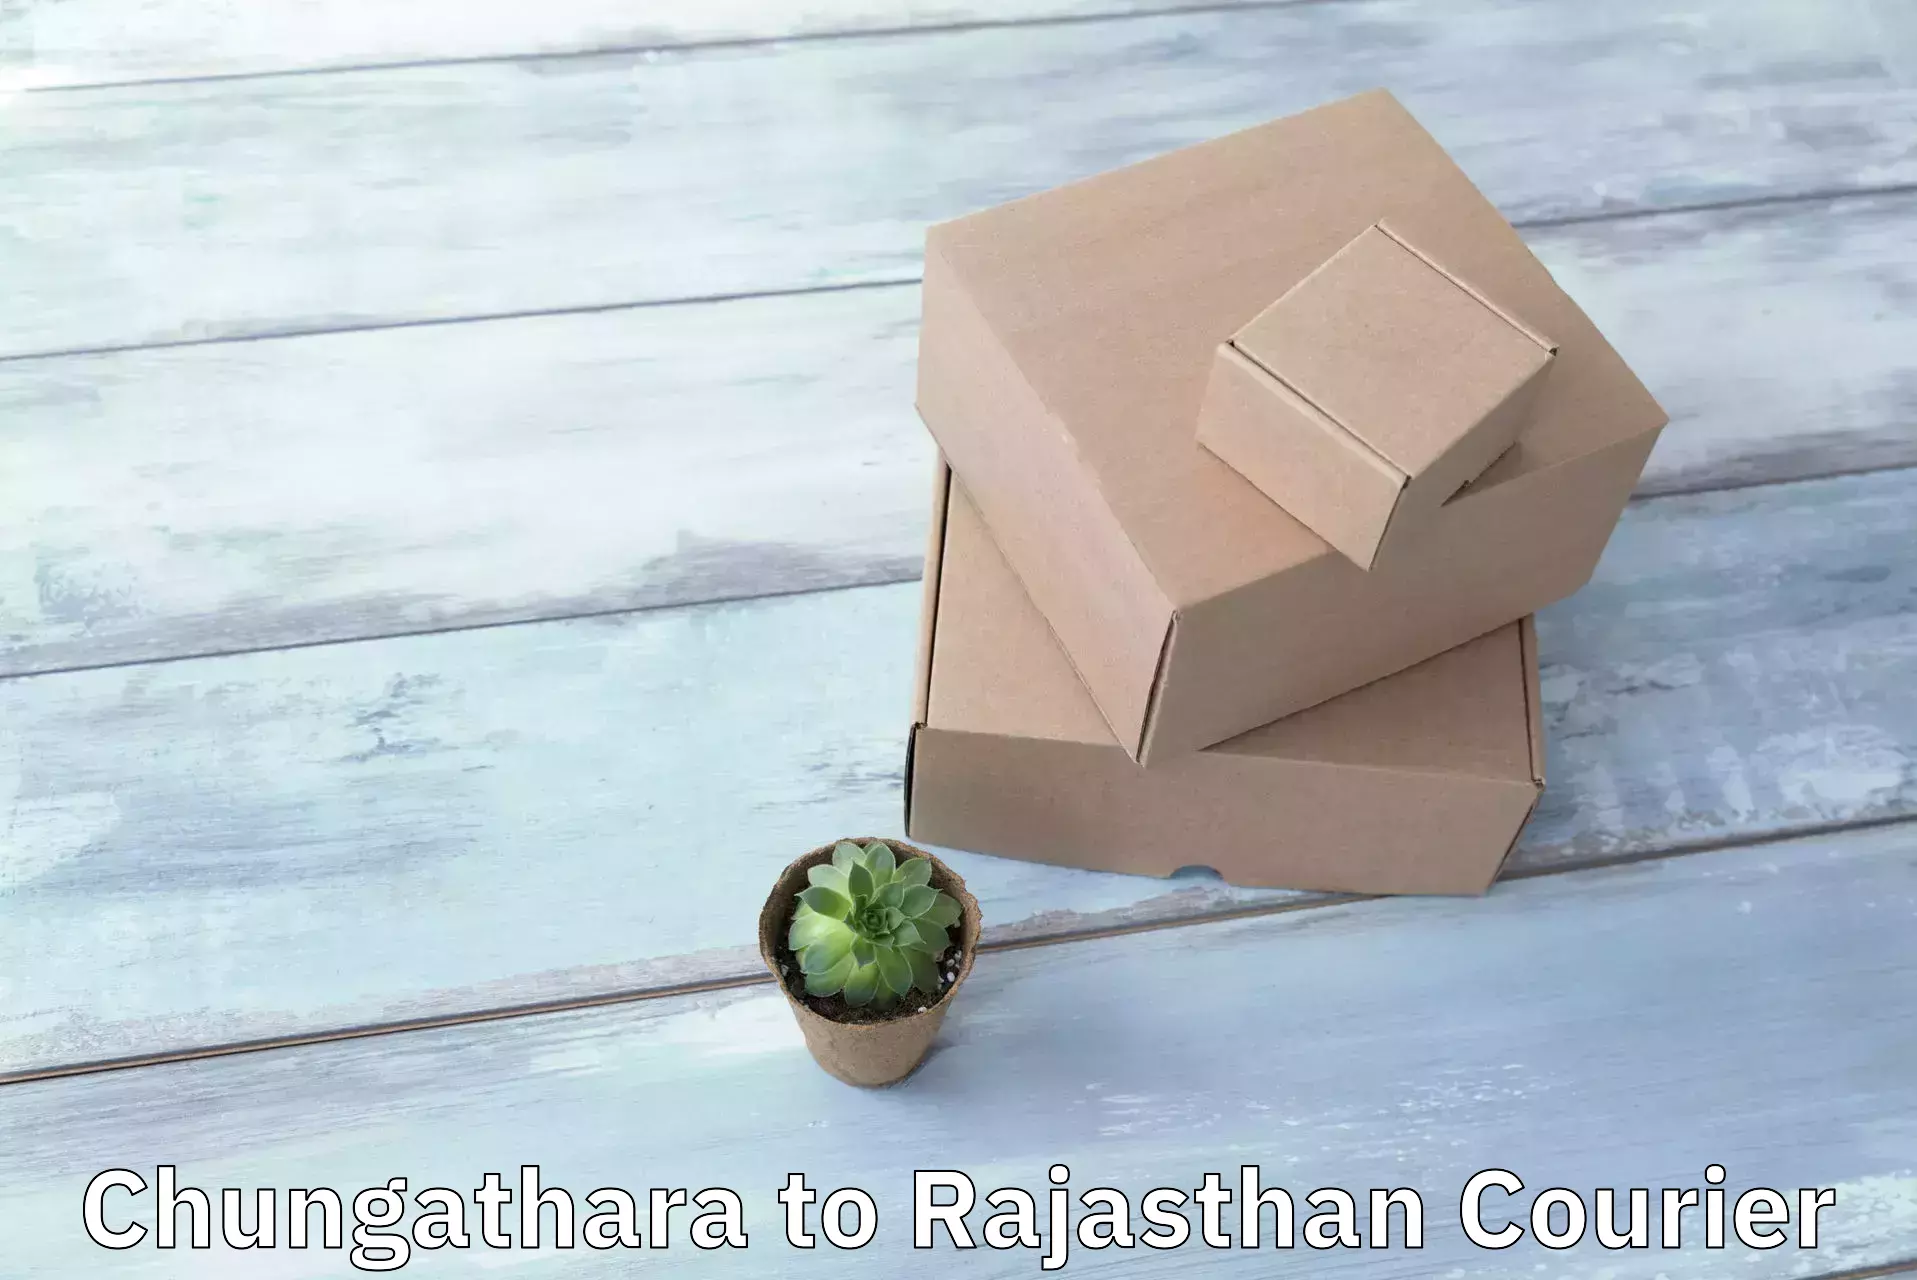 Global courier networks Chungathara to Rajasthan